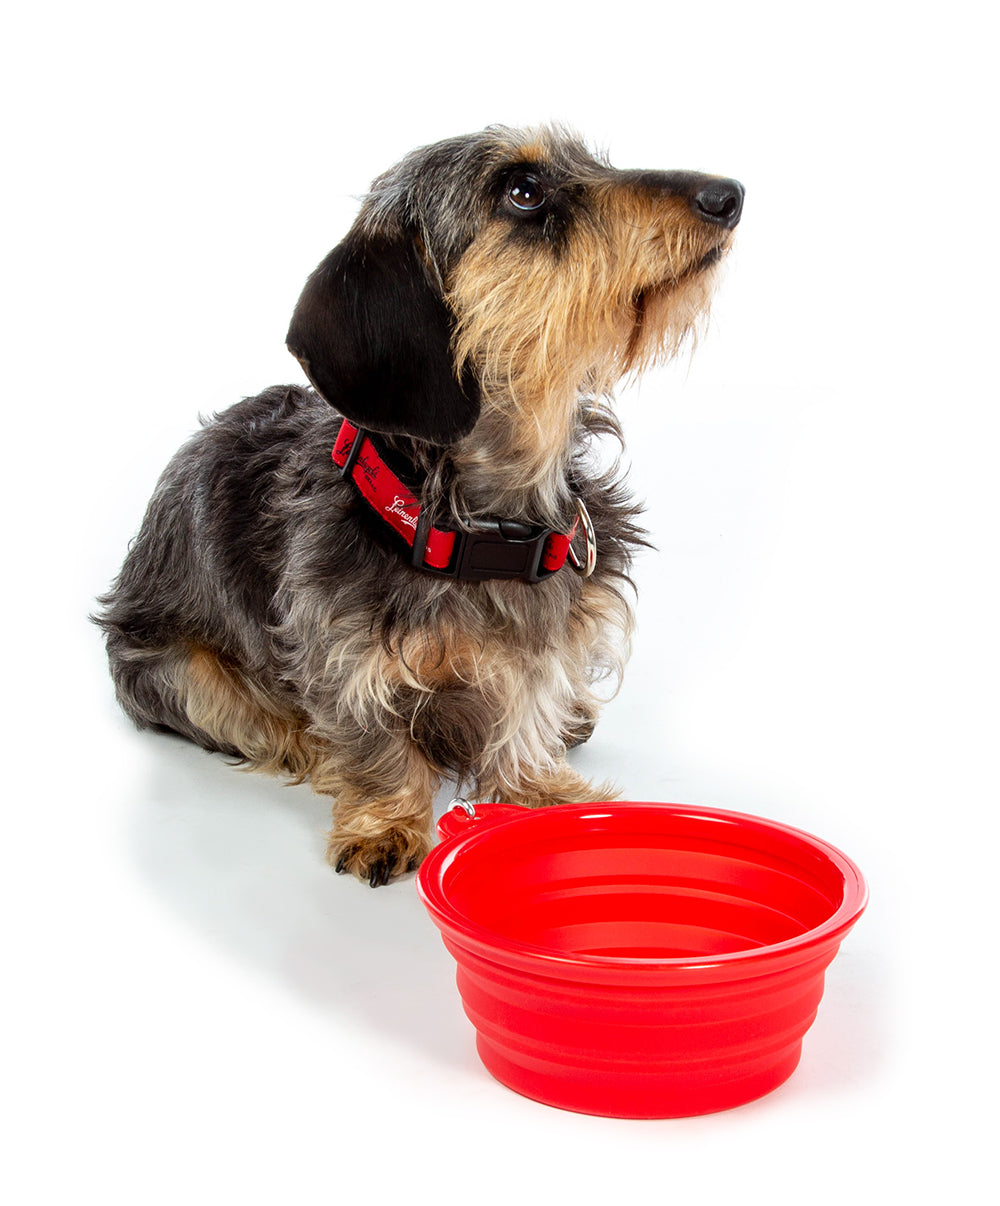 RED COLLAPSIBLE PET BOWL